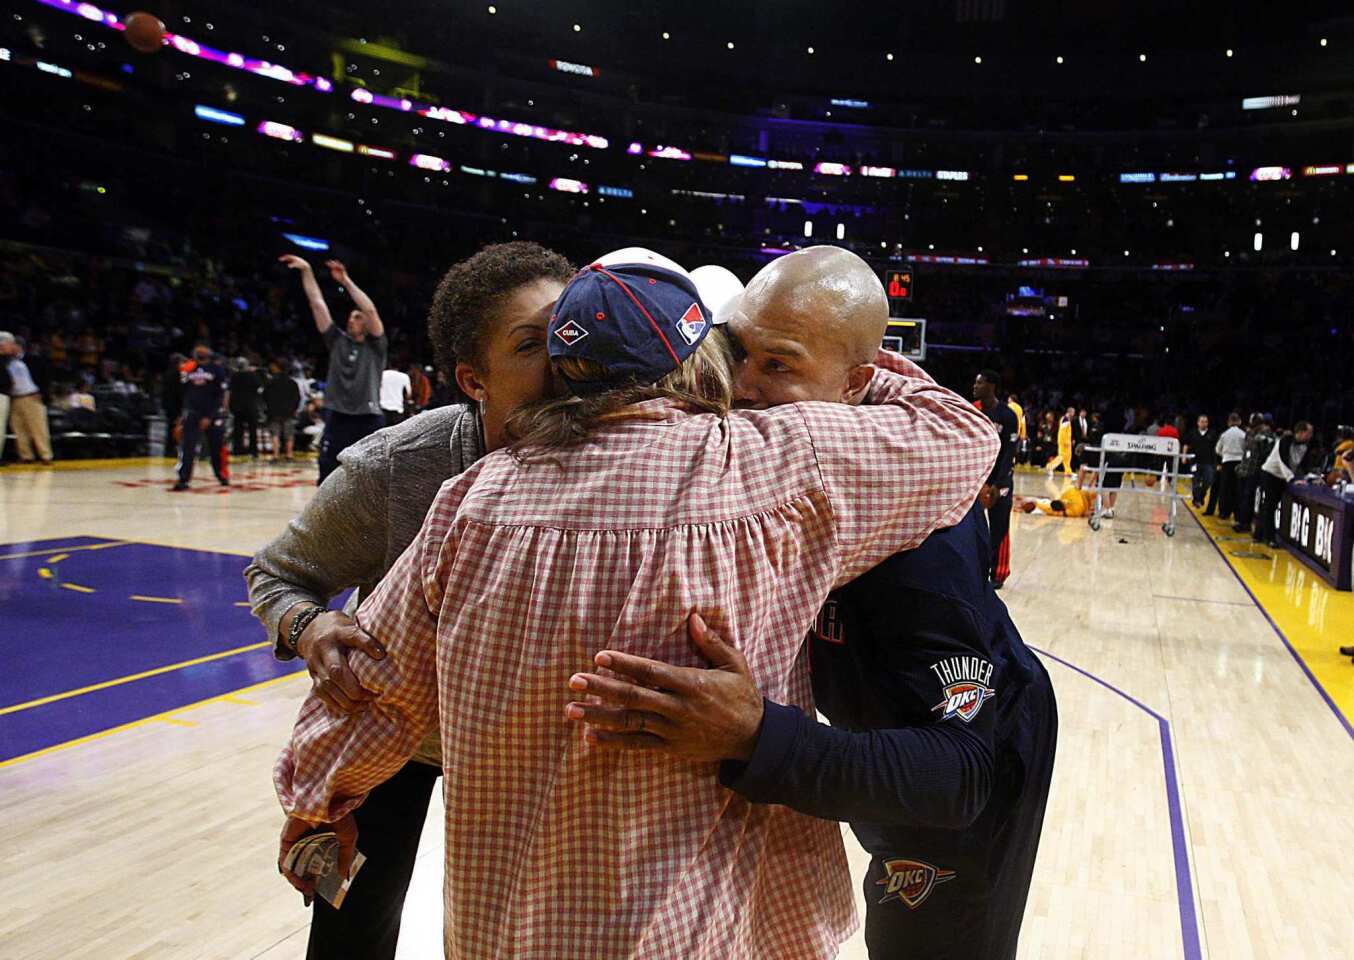 Former Lakers point guard Derek Fisher embraces TV analyst Cheryl Miller and producer/actor Penny Marshall in a group hug before playing with the Thunder against L.A. on Thursday night at Staples Center.